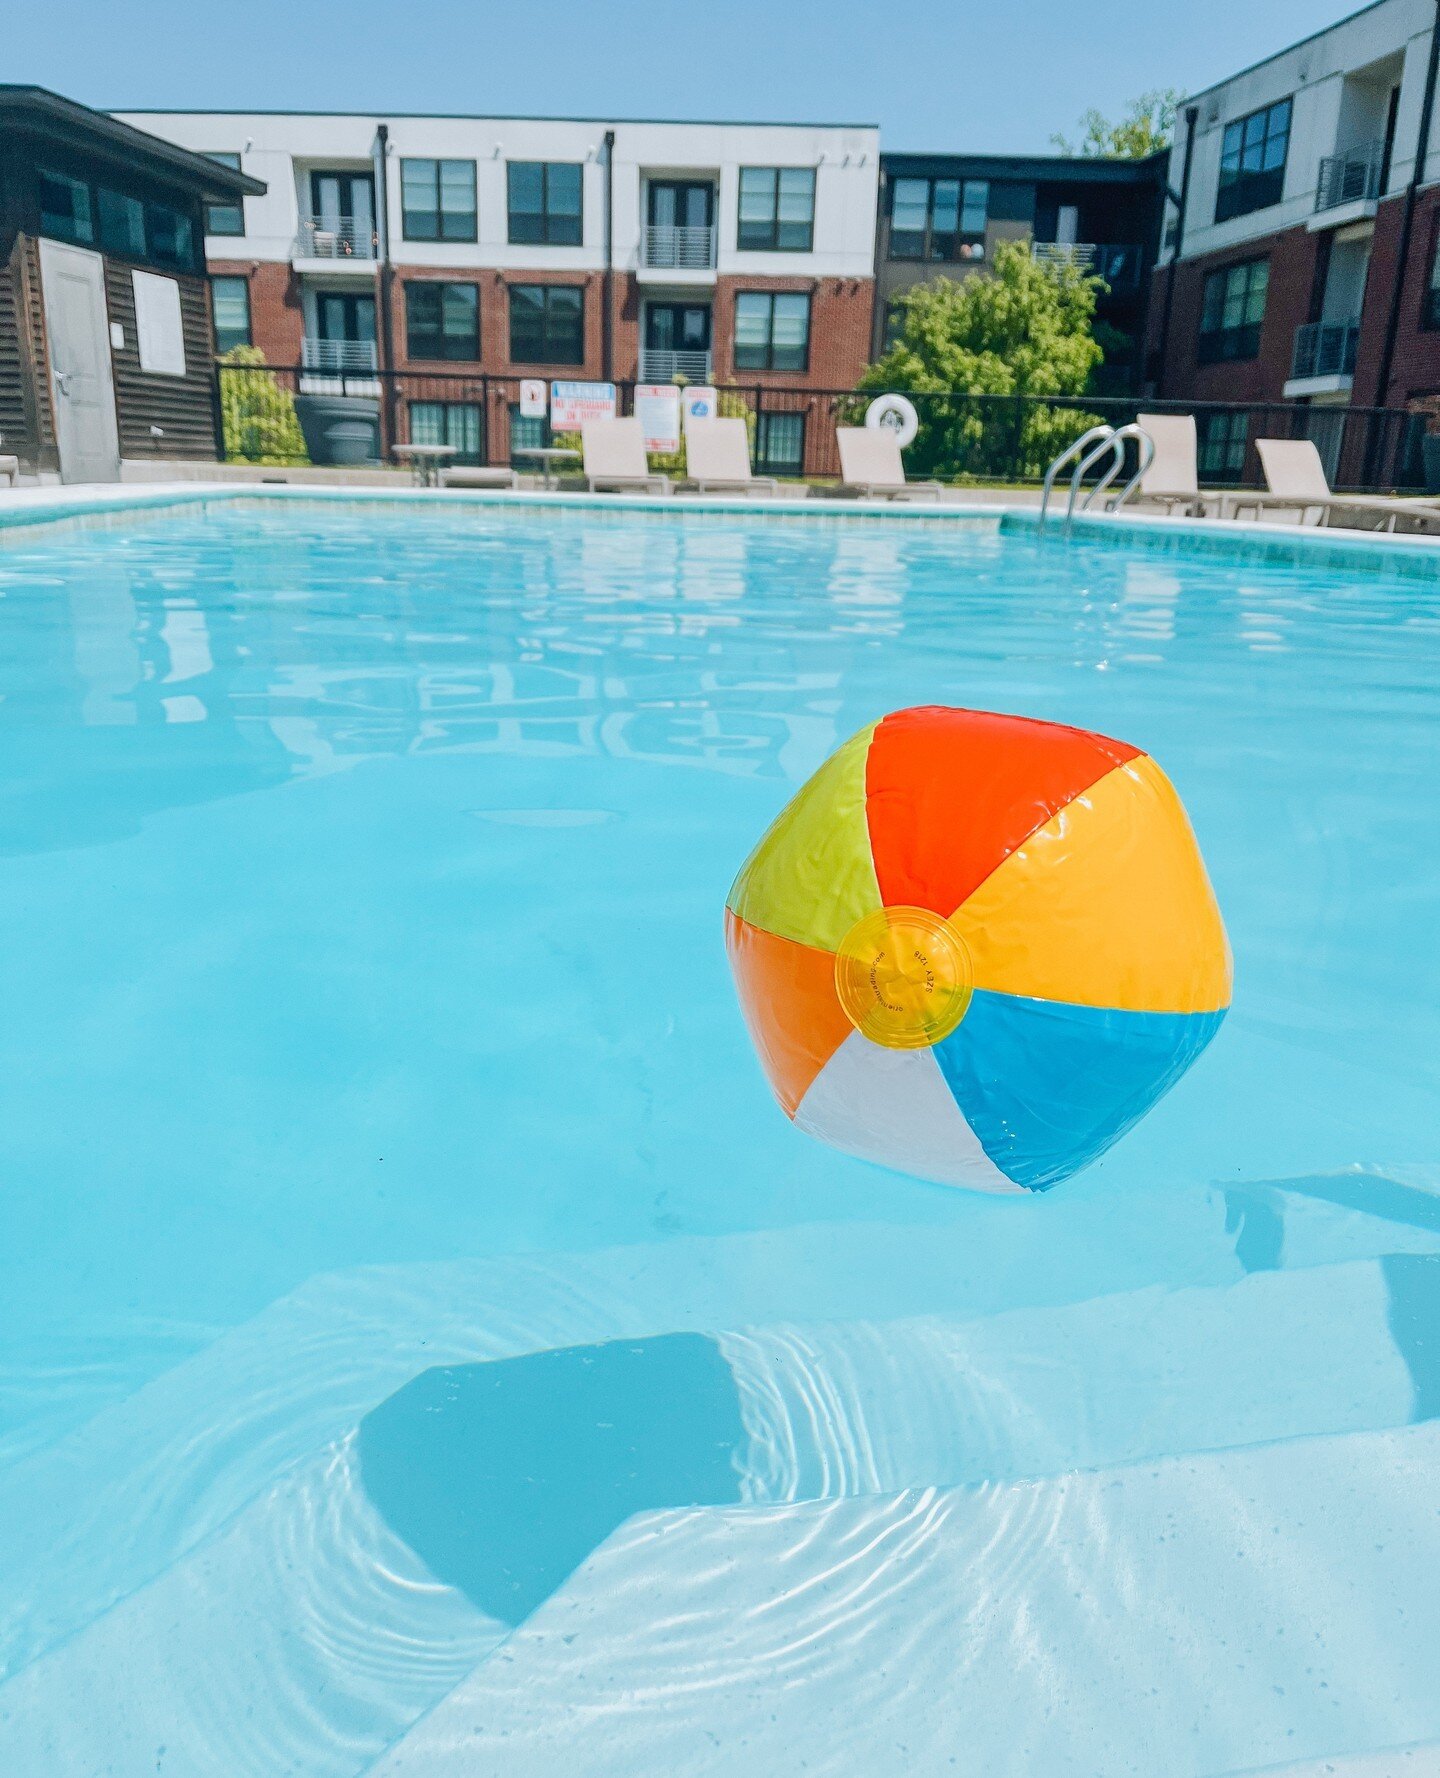 THE POOL IF OFFICALLY OPEN!!!⁠
⁠
☀️Lease with us so you can enjoy the River Gate pool☀️⁠
⁠
#livesouthgreen #rivergateou⁠